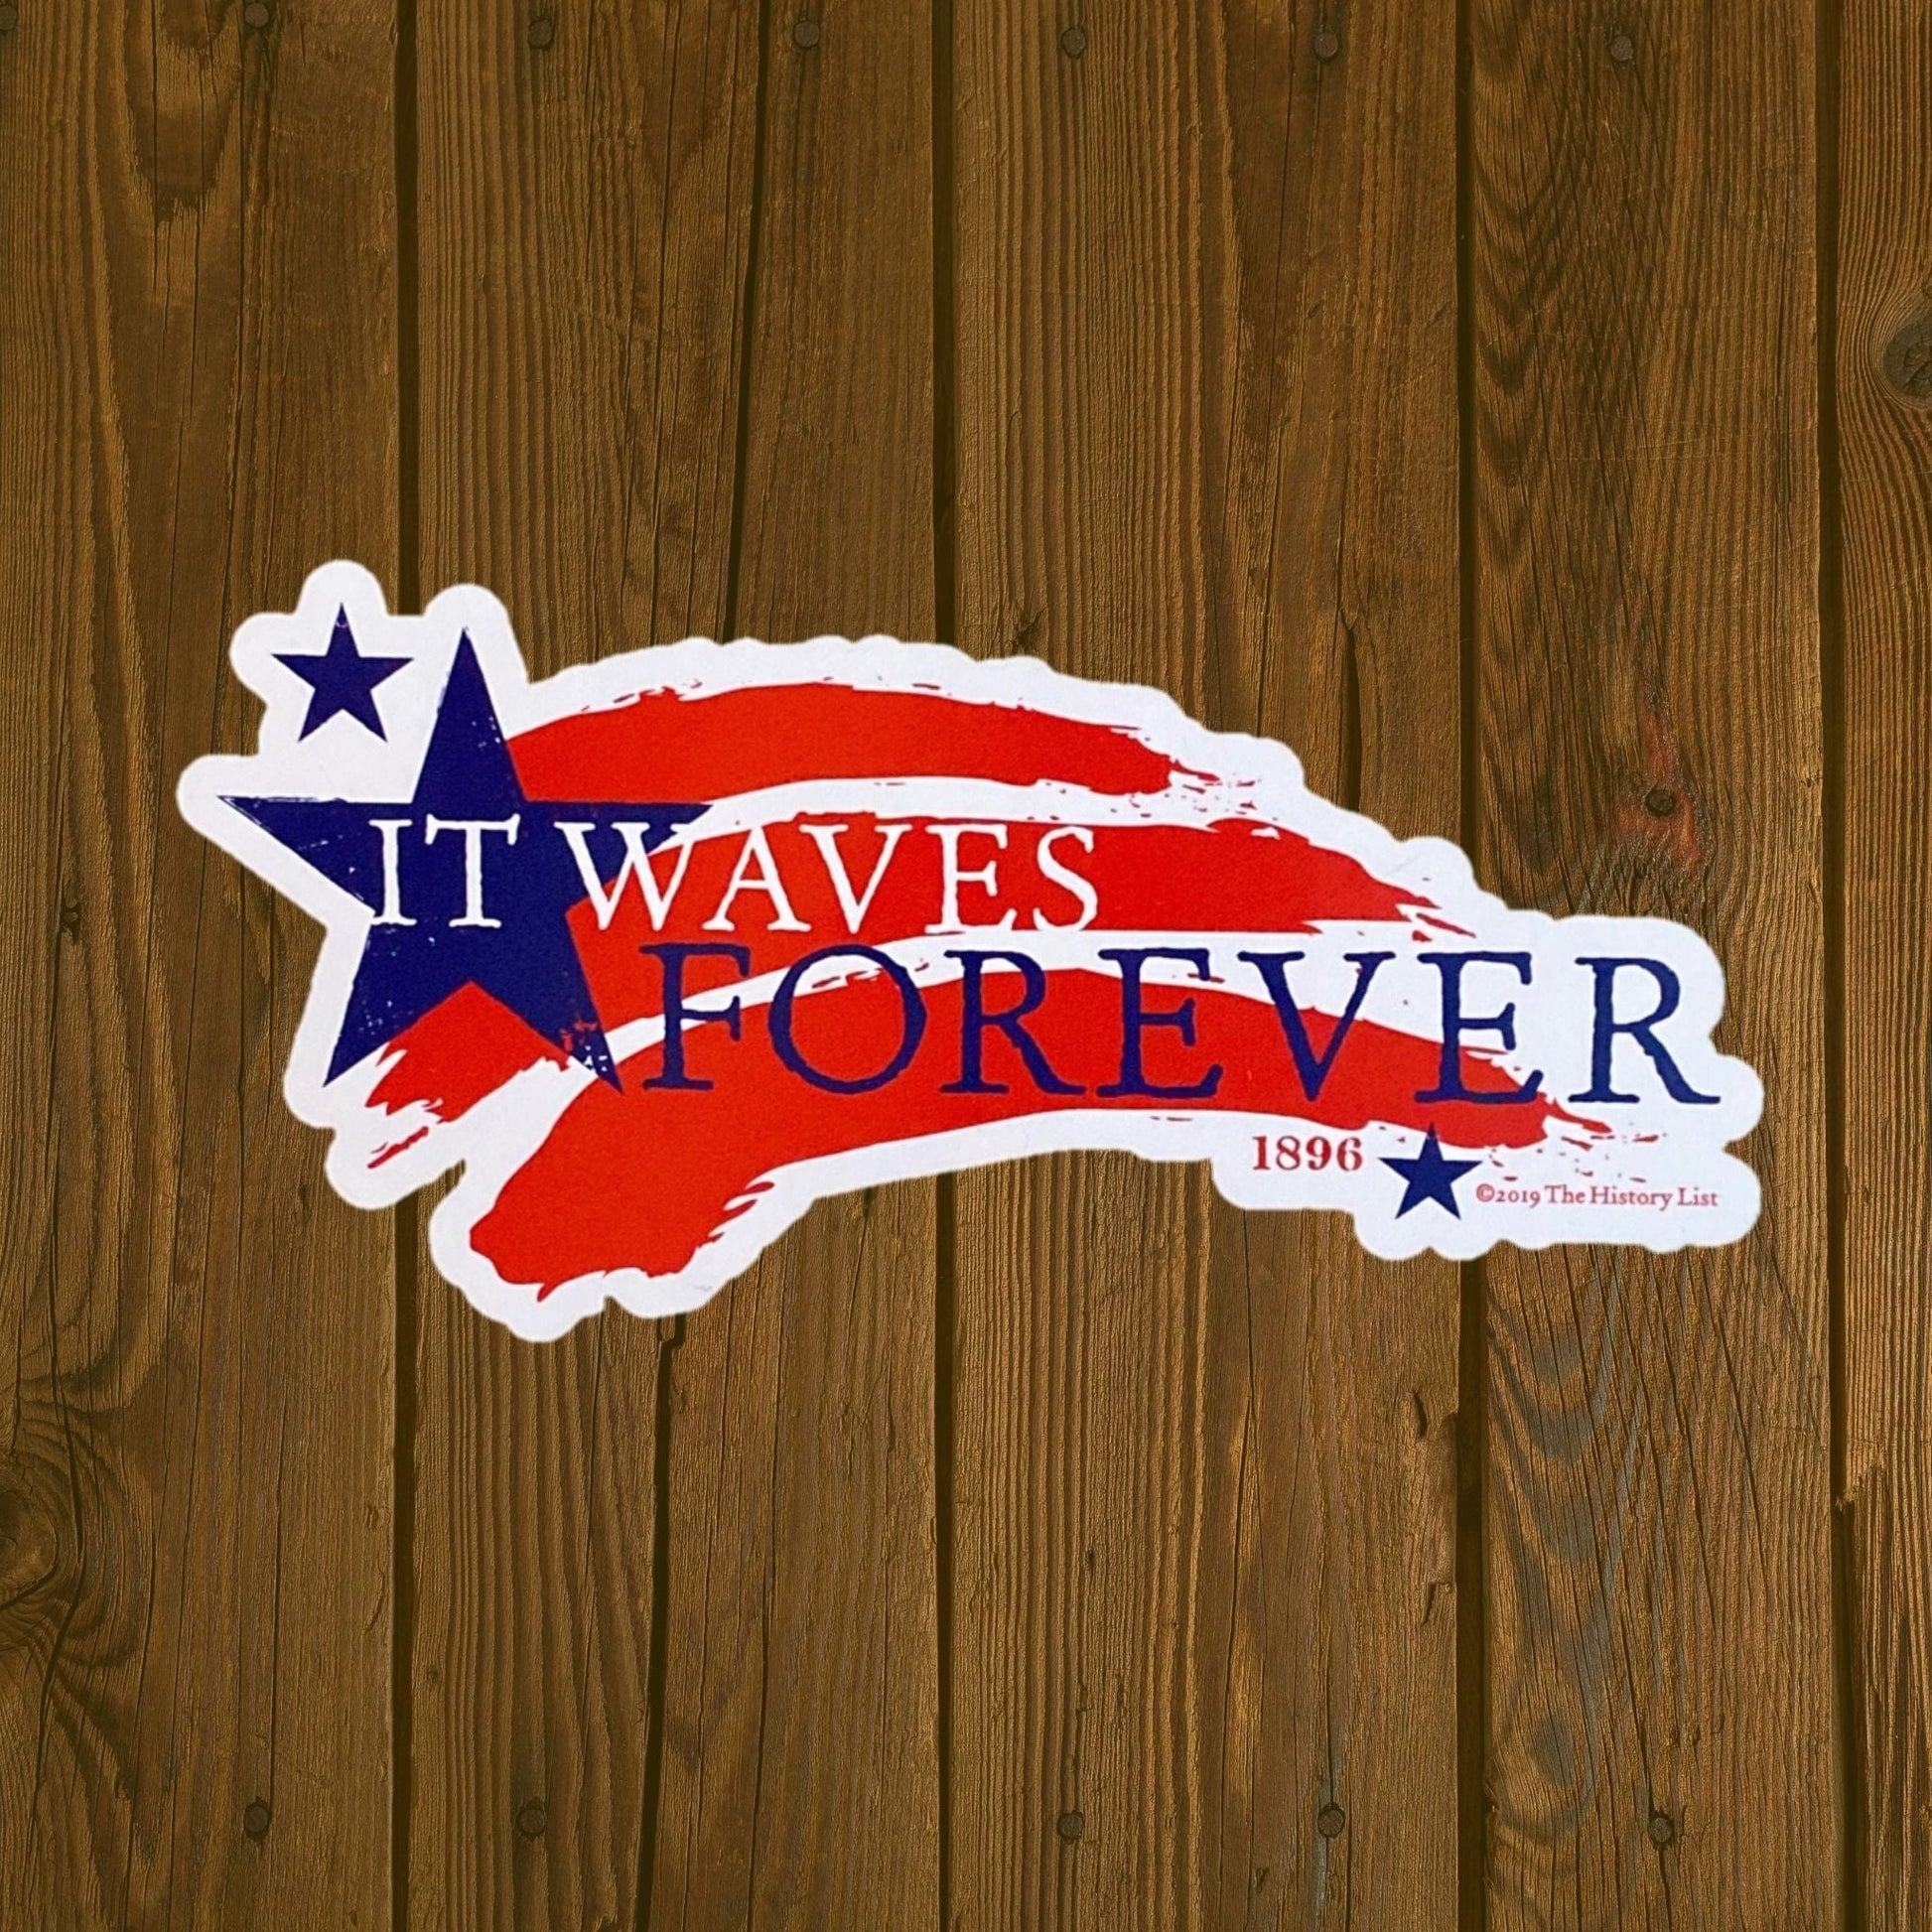 "It Waves Forever" Sticker from the history list store